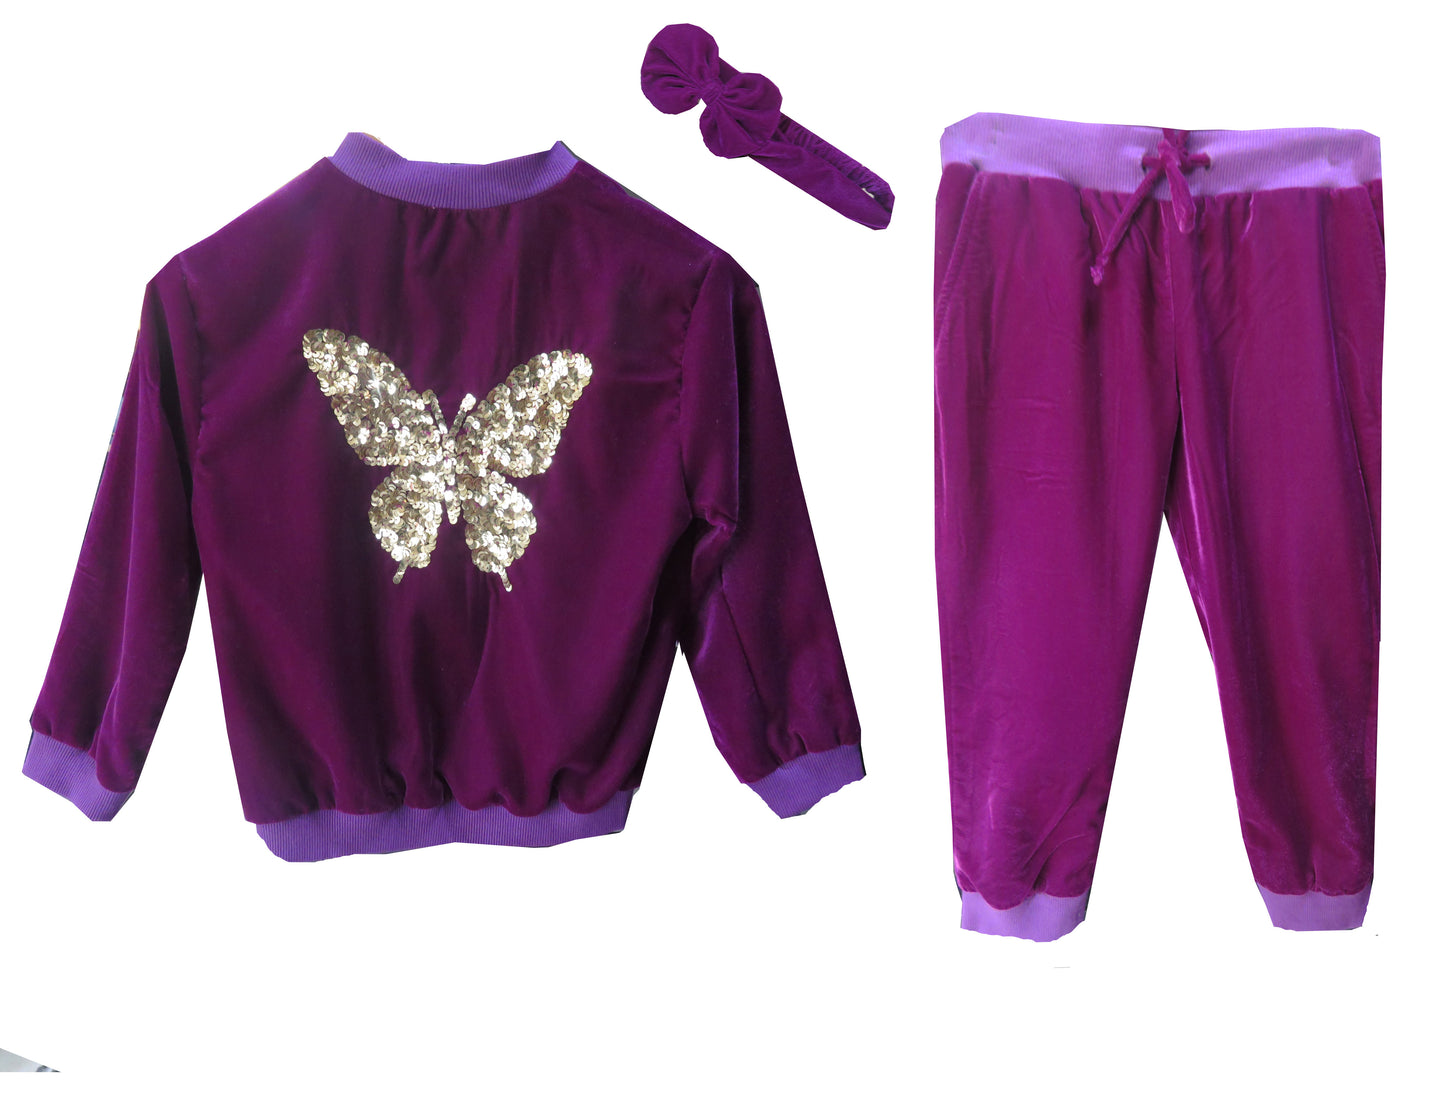 PURPLE VELVET TRACK SUIT WITH A SEQUINNED BUTTERFLY ON THE BACK AND HAIRBAND ( LEAD TIME 15-20 DAYS)